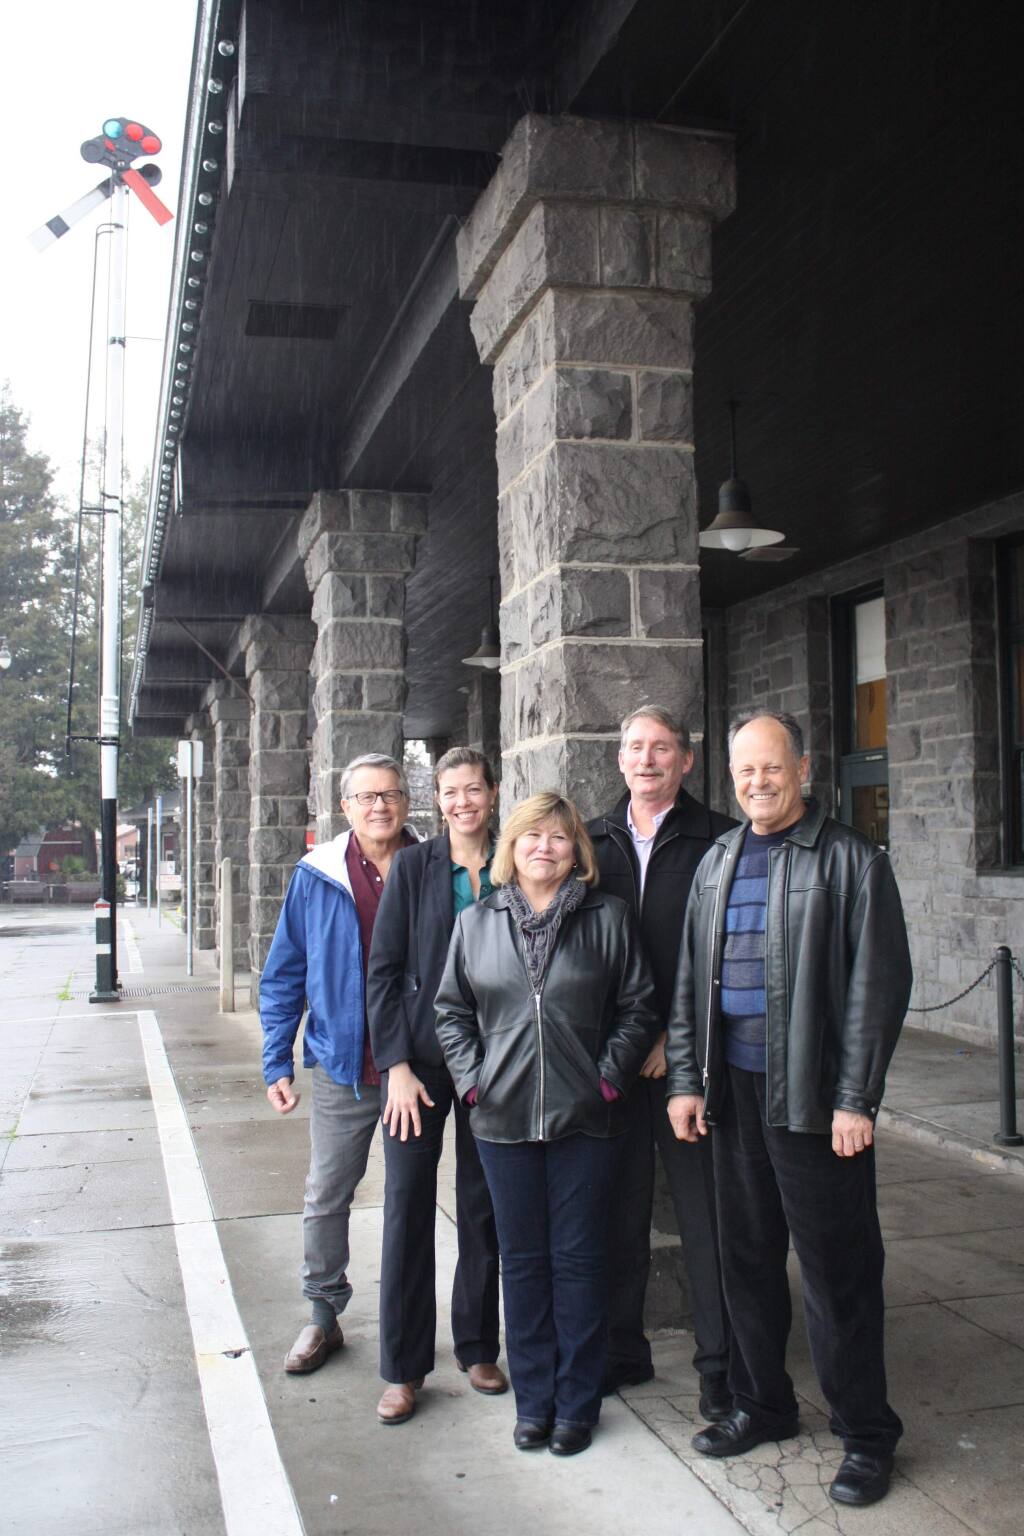 Urban Community Partnership founders (from left) David Petritz, Robin Stephani, Karen Weeks, Peter Stanley and Mitch Conner in front of the still undeveloped Railroad Square SMART station in Santa Rosa on Jan. 14, 2016. Paul Fritz is not pictured. (Gary Quackenbush / North Bay Business Journal)